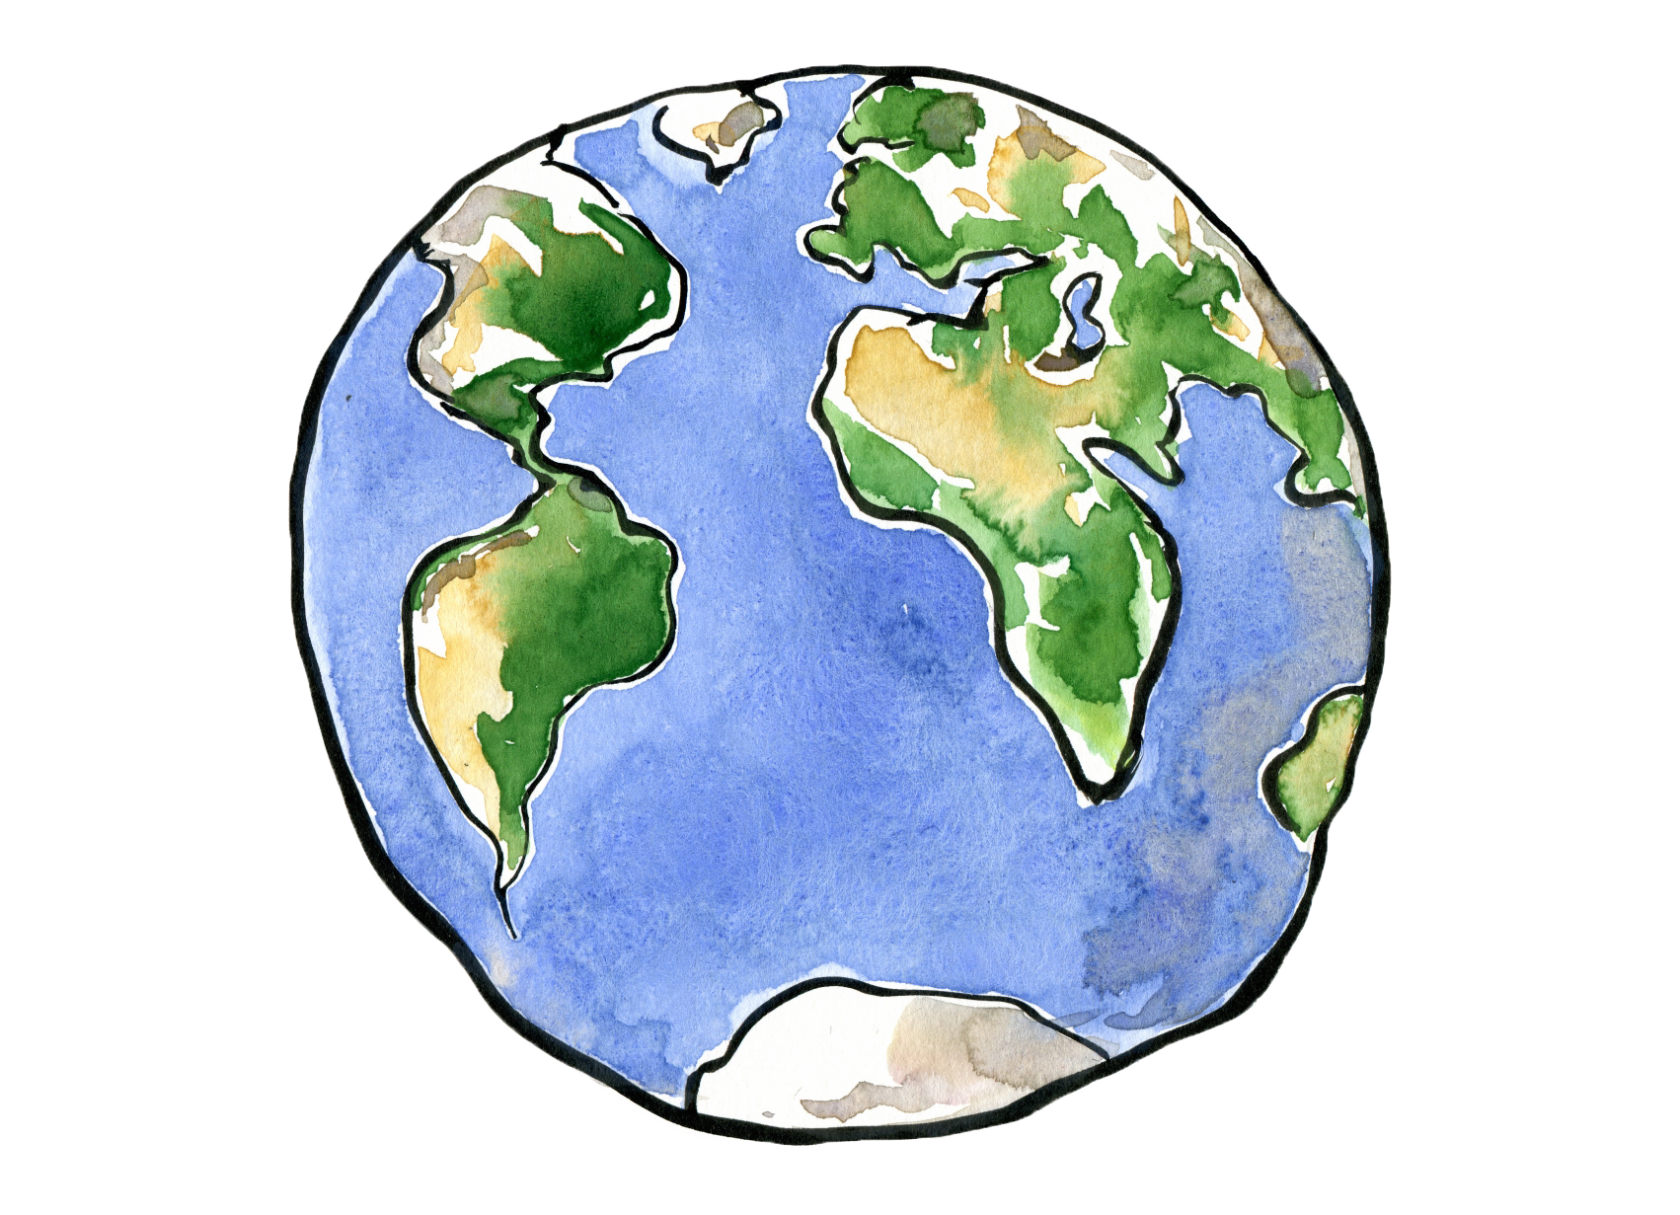 clipart earth sketch